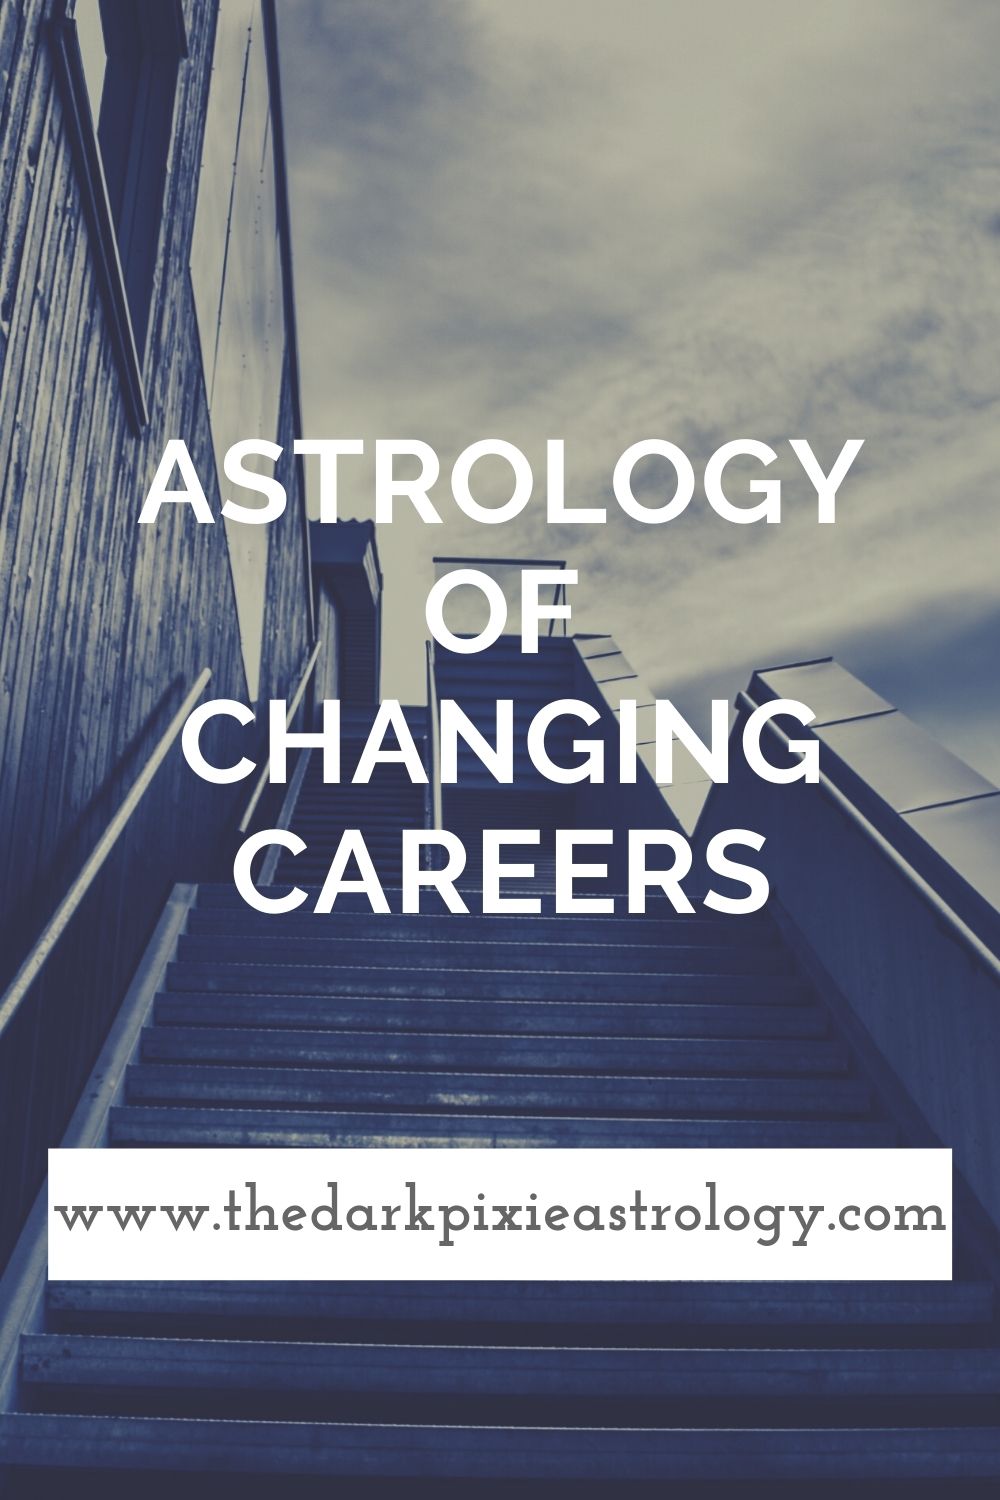 Astrology of Changing Careers - The Dark Pixie Astrology